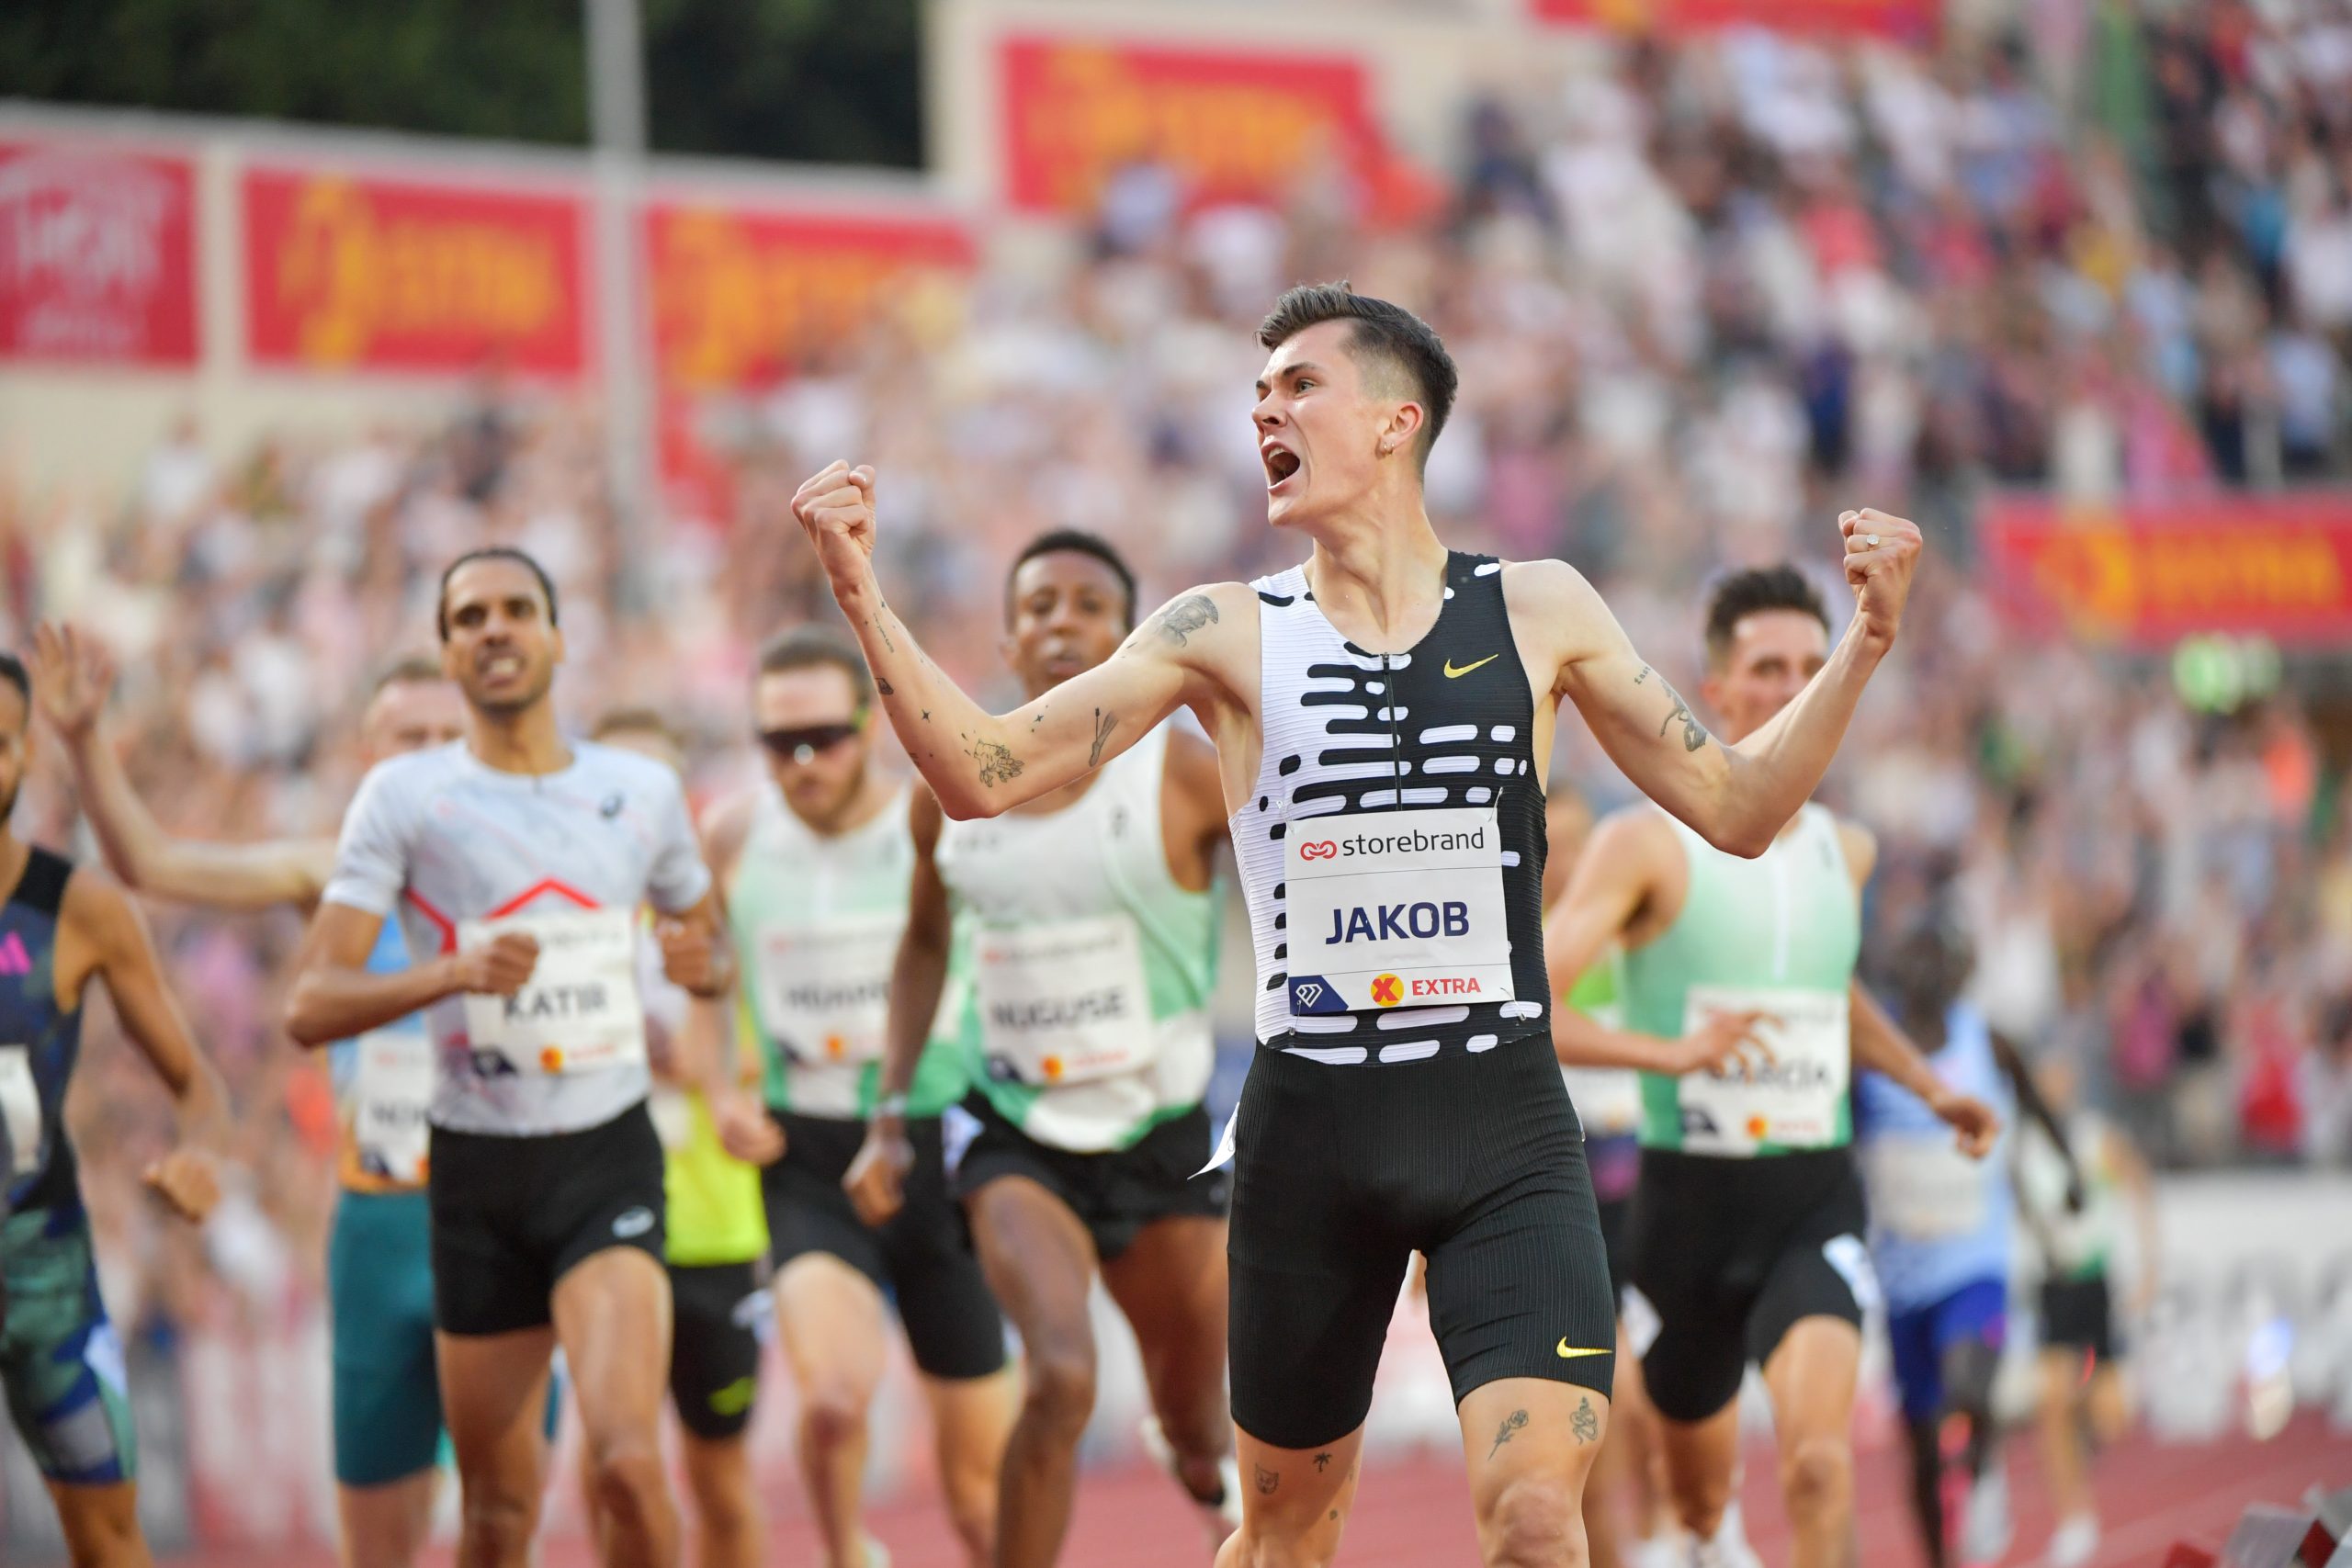 2023 Athletissima Results 2023 Lausanne Diamond League Results